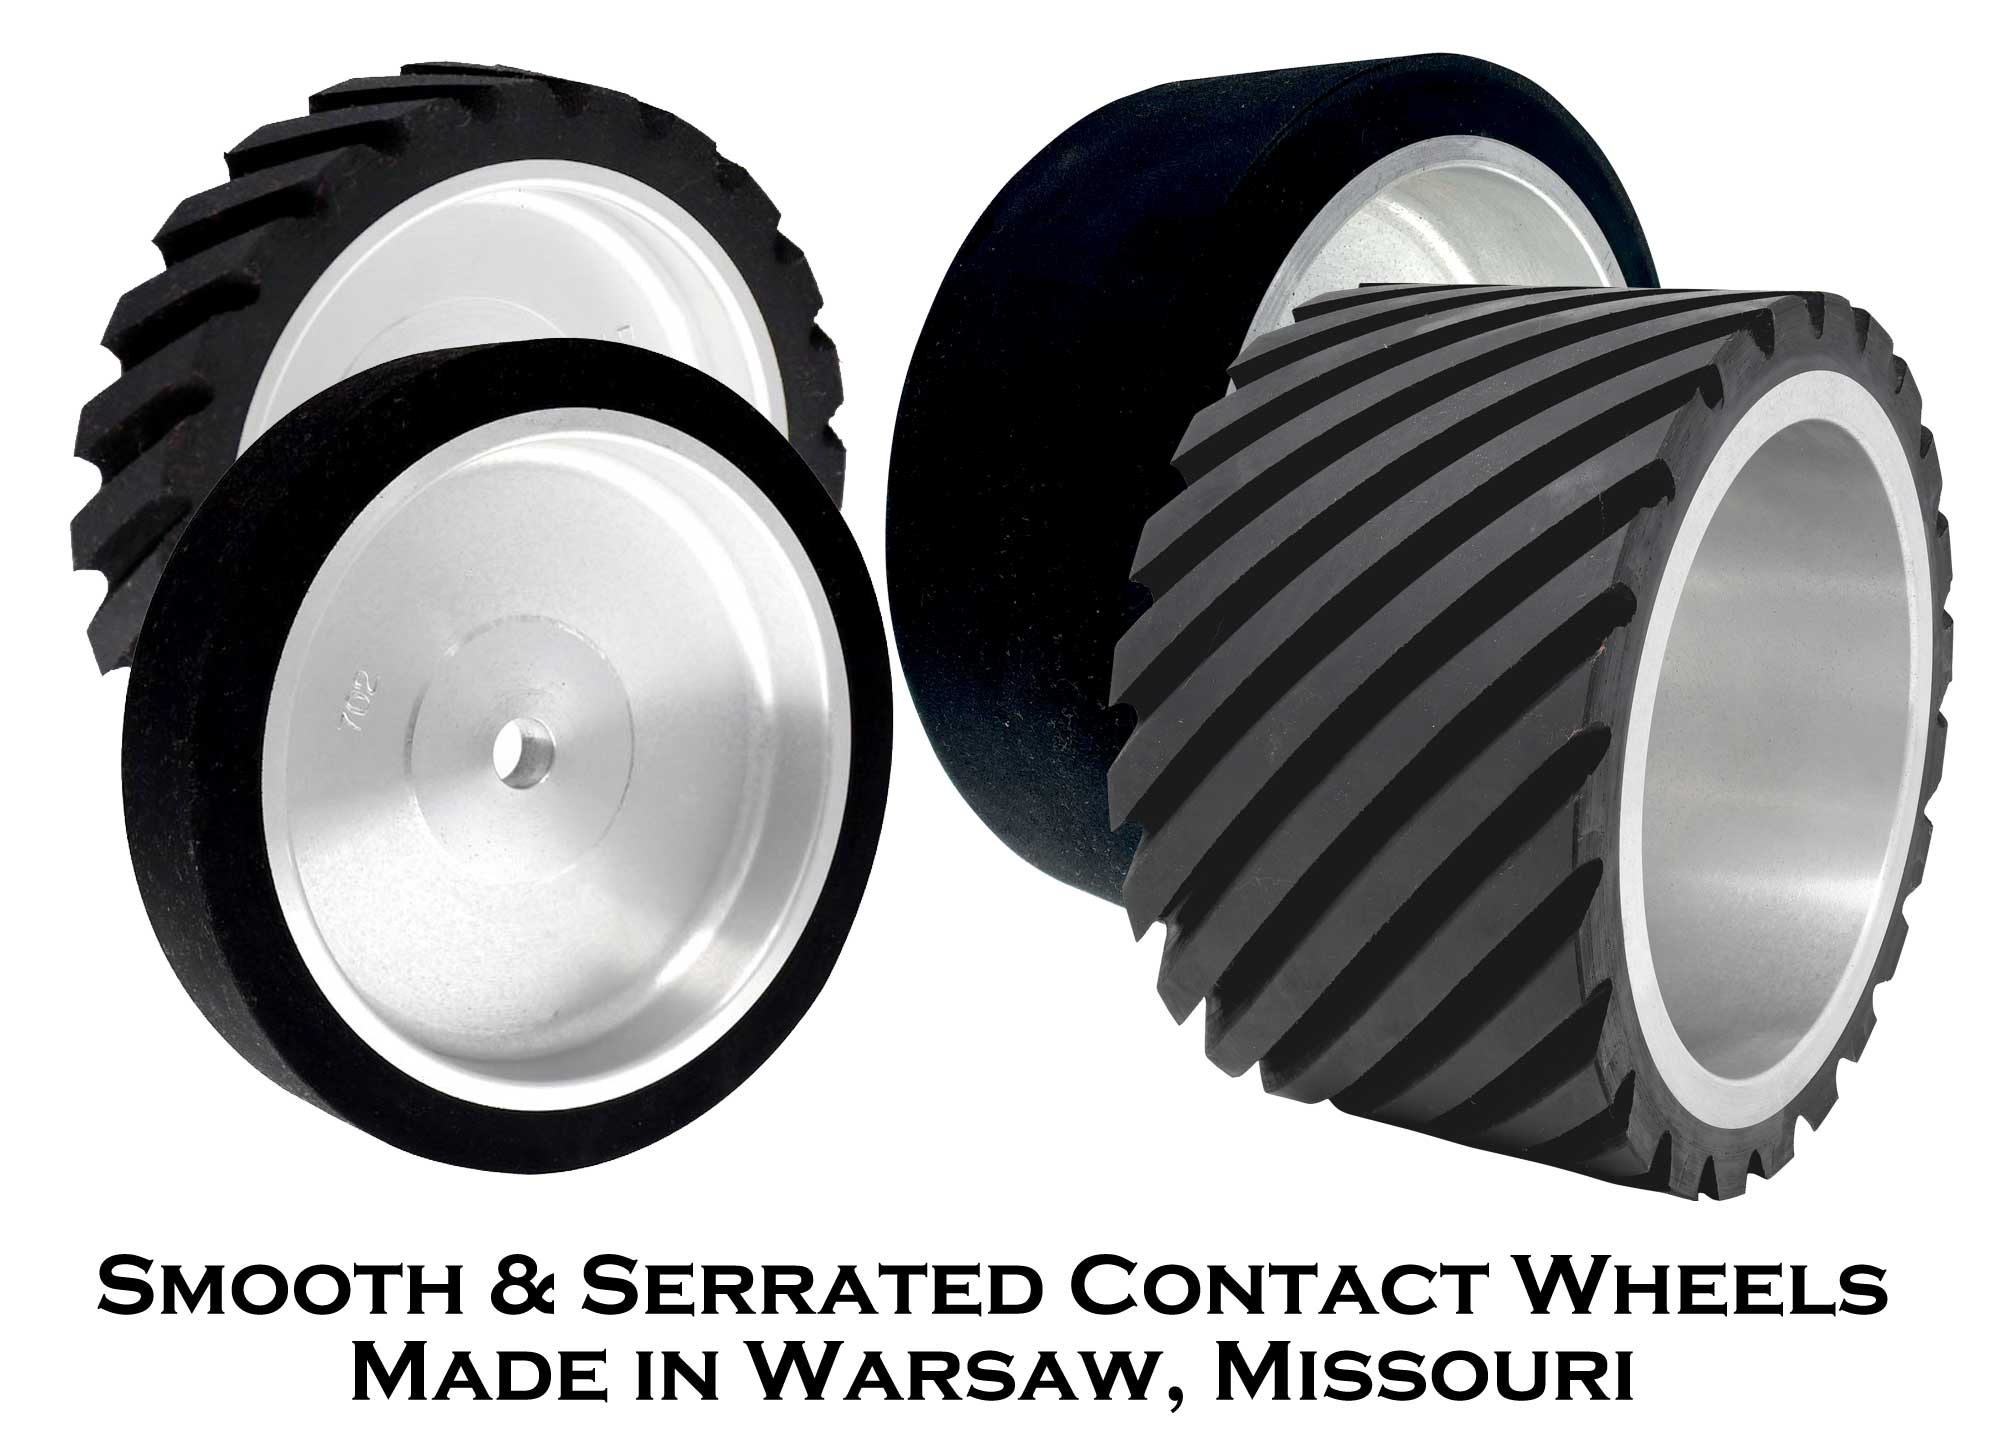 Smooth and Serrated Contact Wheels - 55 & 90 Duro Neoprene Rubber